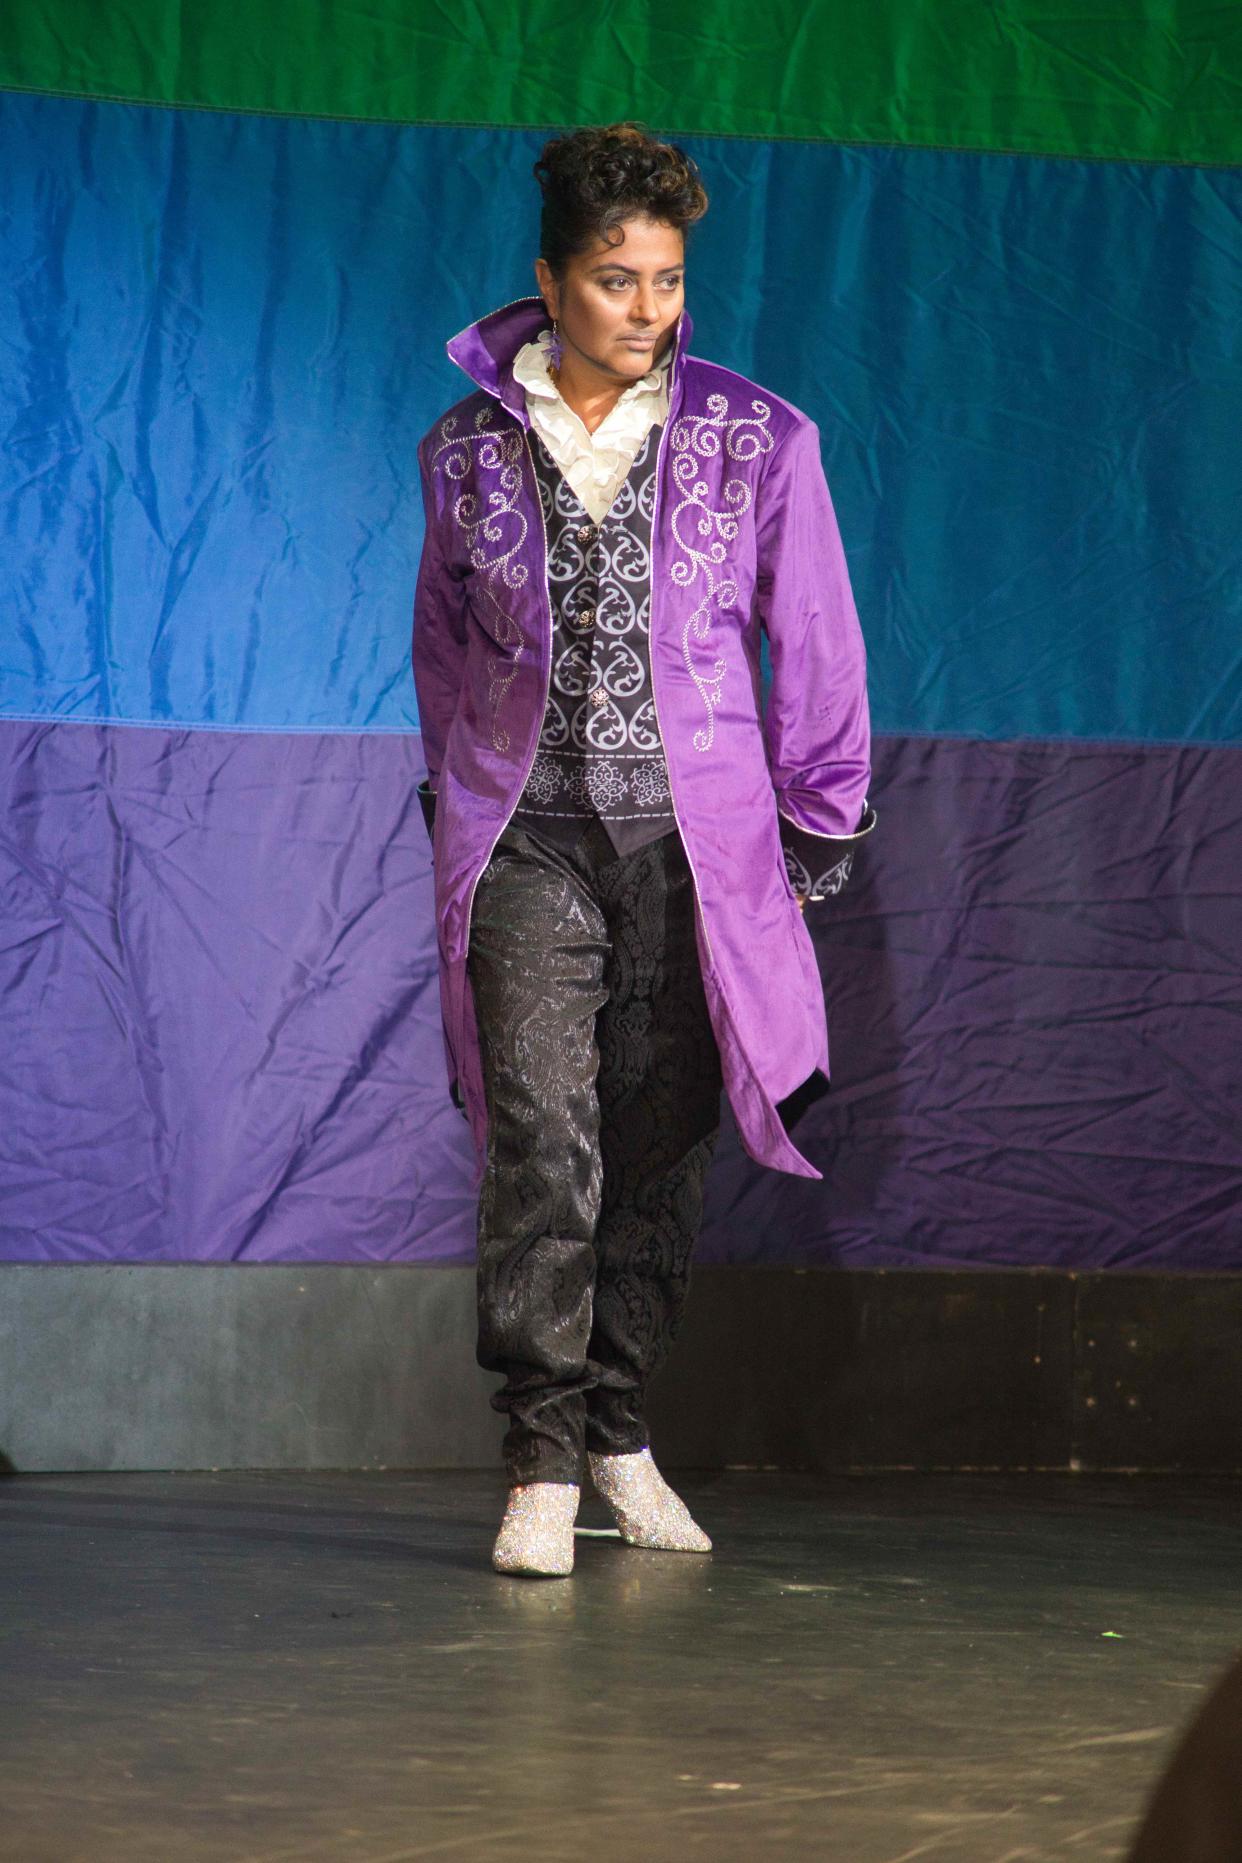 Amita Mehta, of Doylestown Borough, competed in and won last year's Pride Pageant as drag king, Amita Lady.